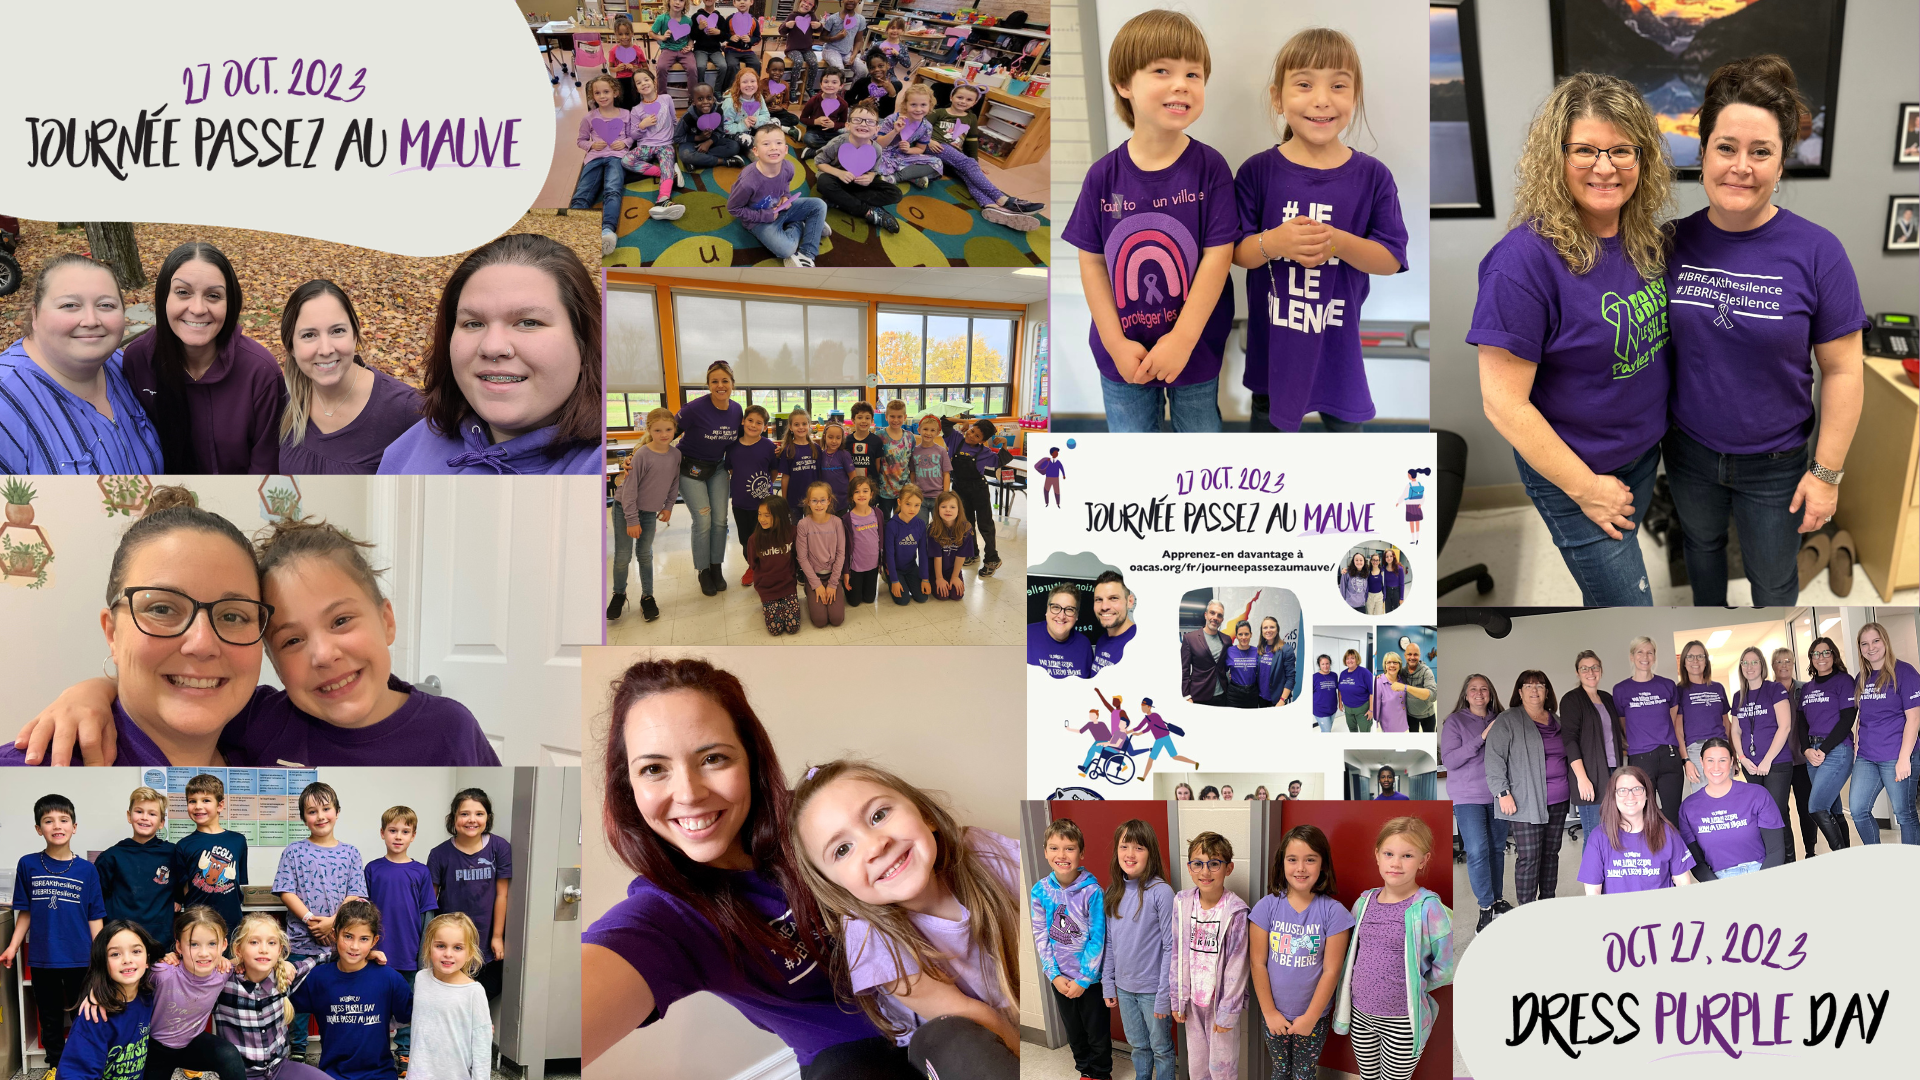 A mosaic featuring photos of people, community partners and schools dressed in purple for Dress Purple Day.